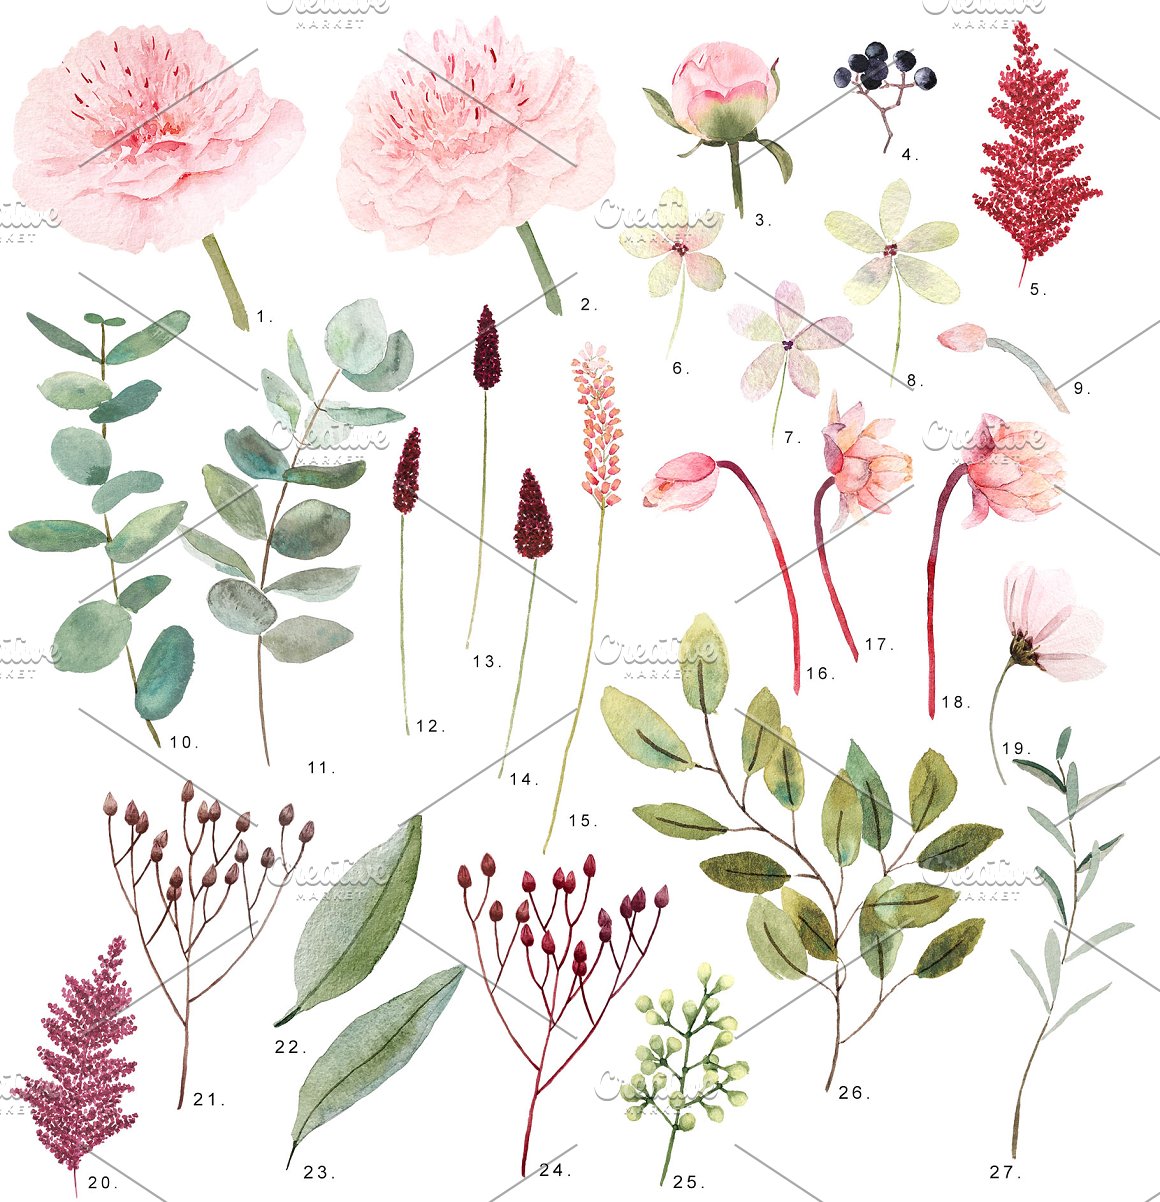 Different patterns of peonies.